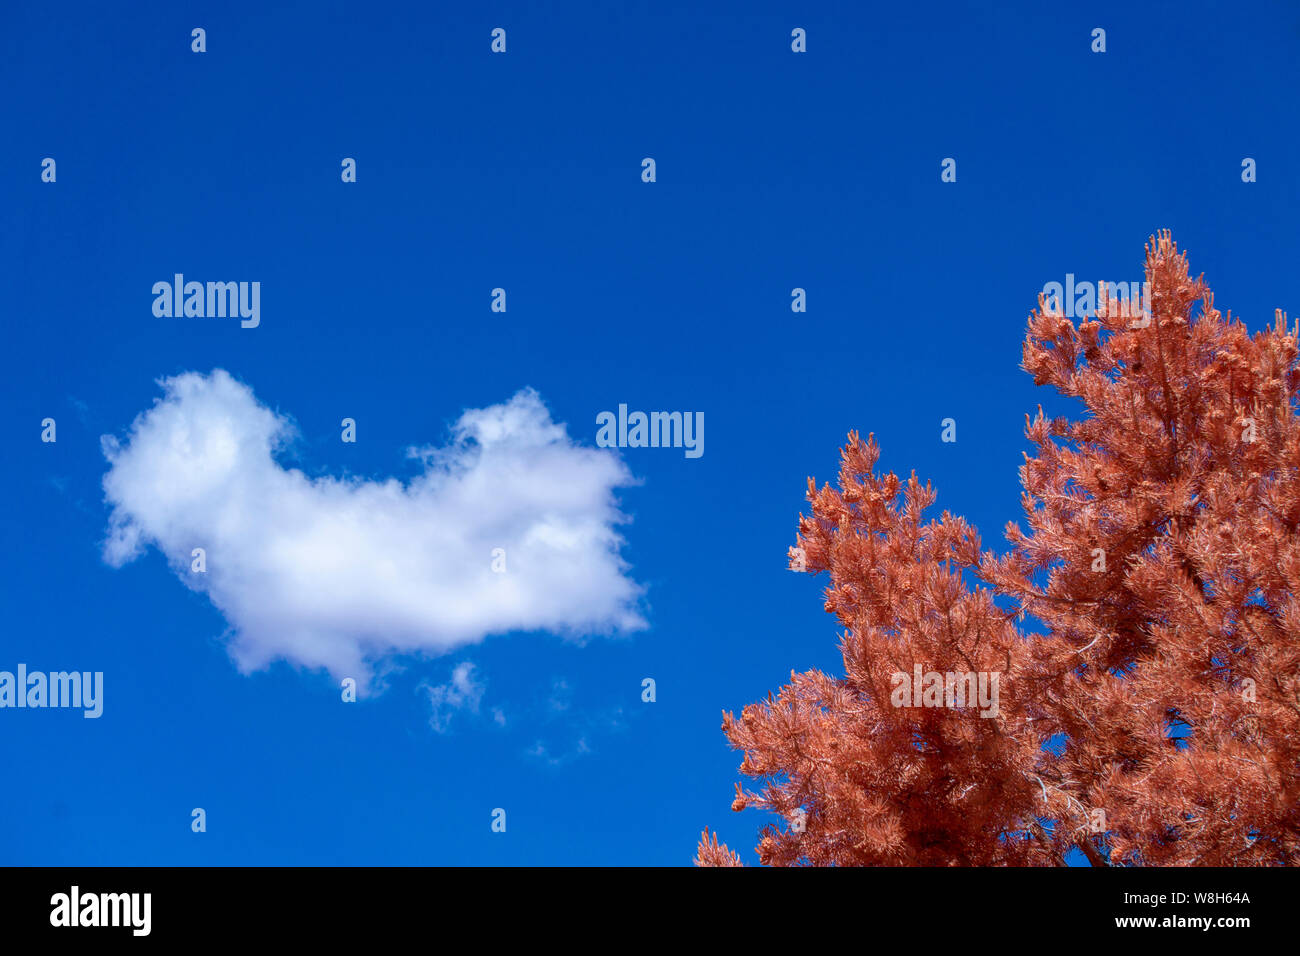 Reddish brown tree top against blue skies with white cloud. Stock Photo